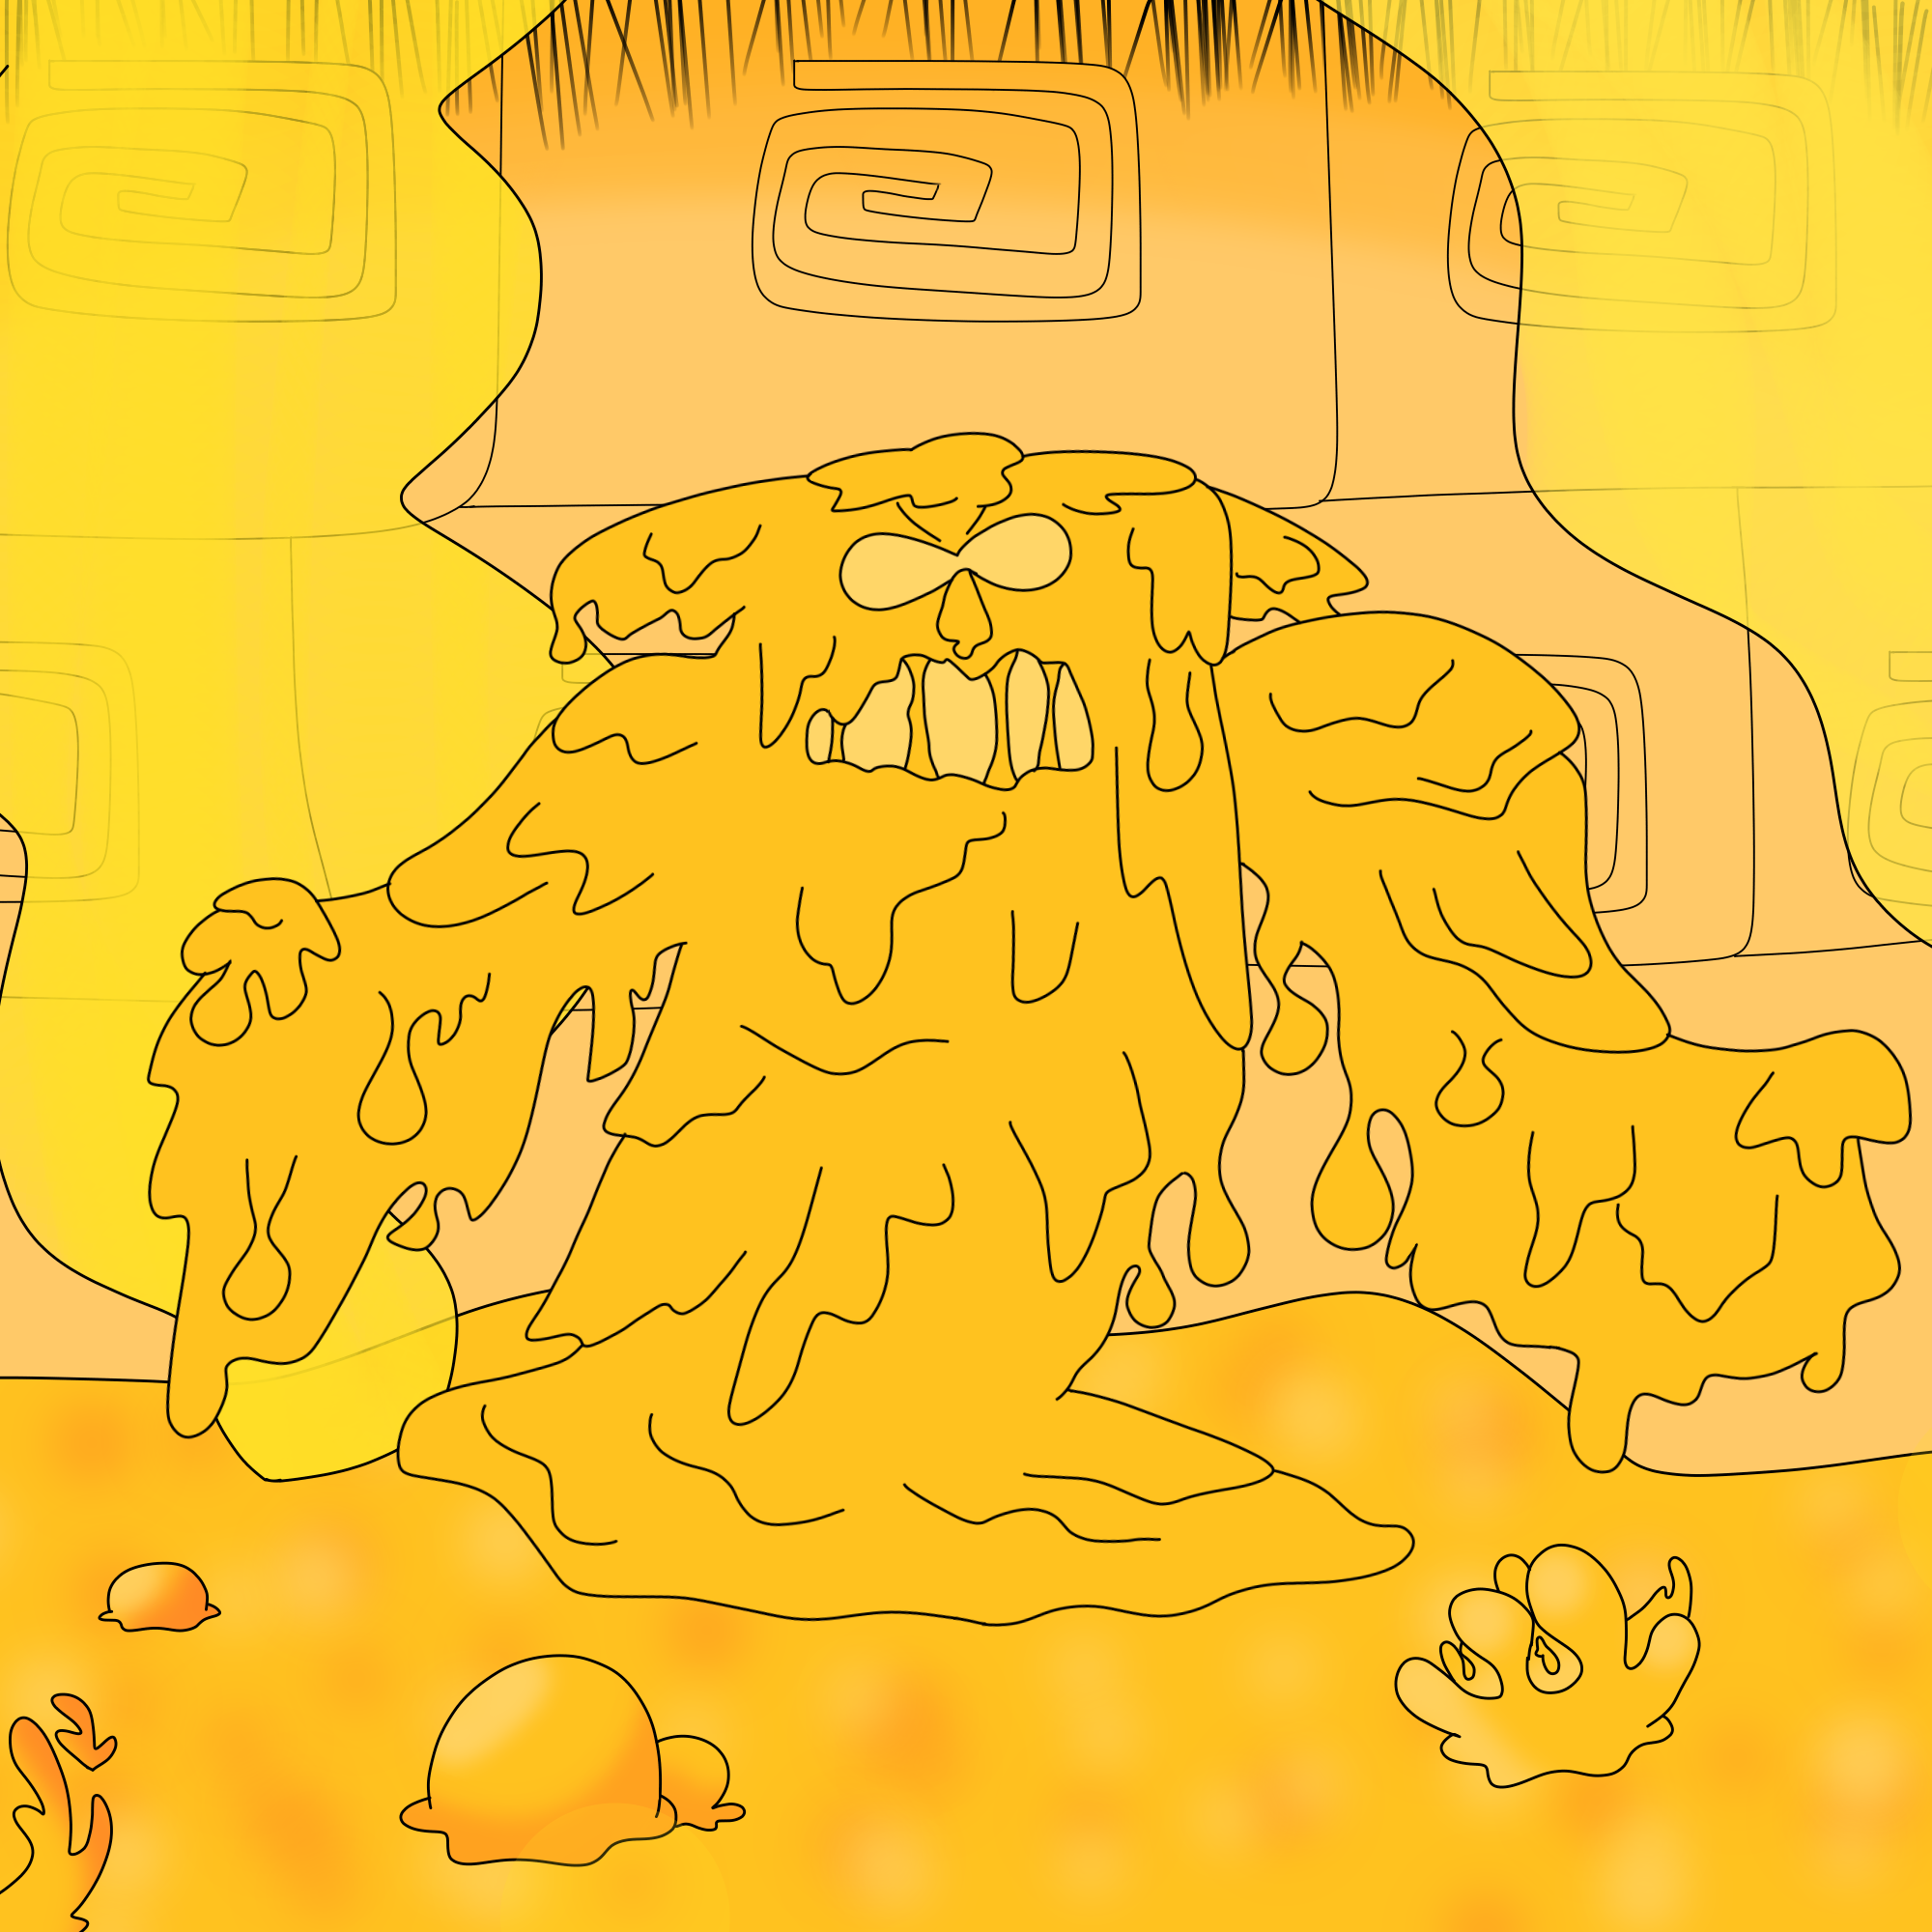 The Golden Cheese Monster